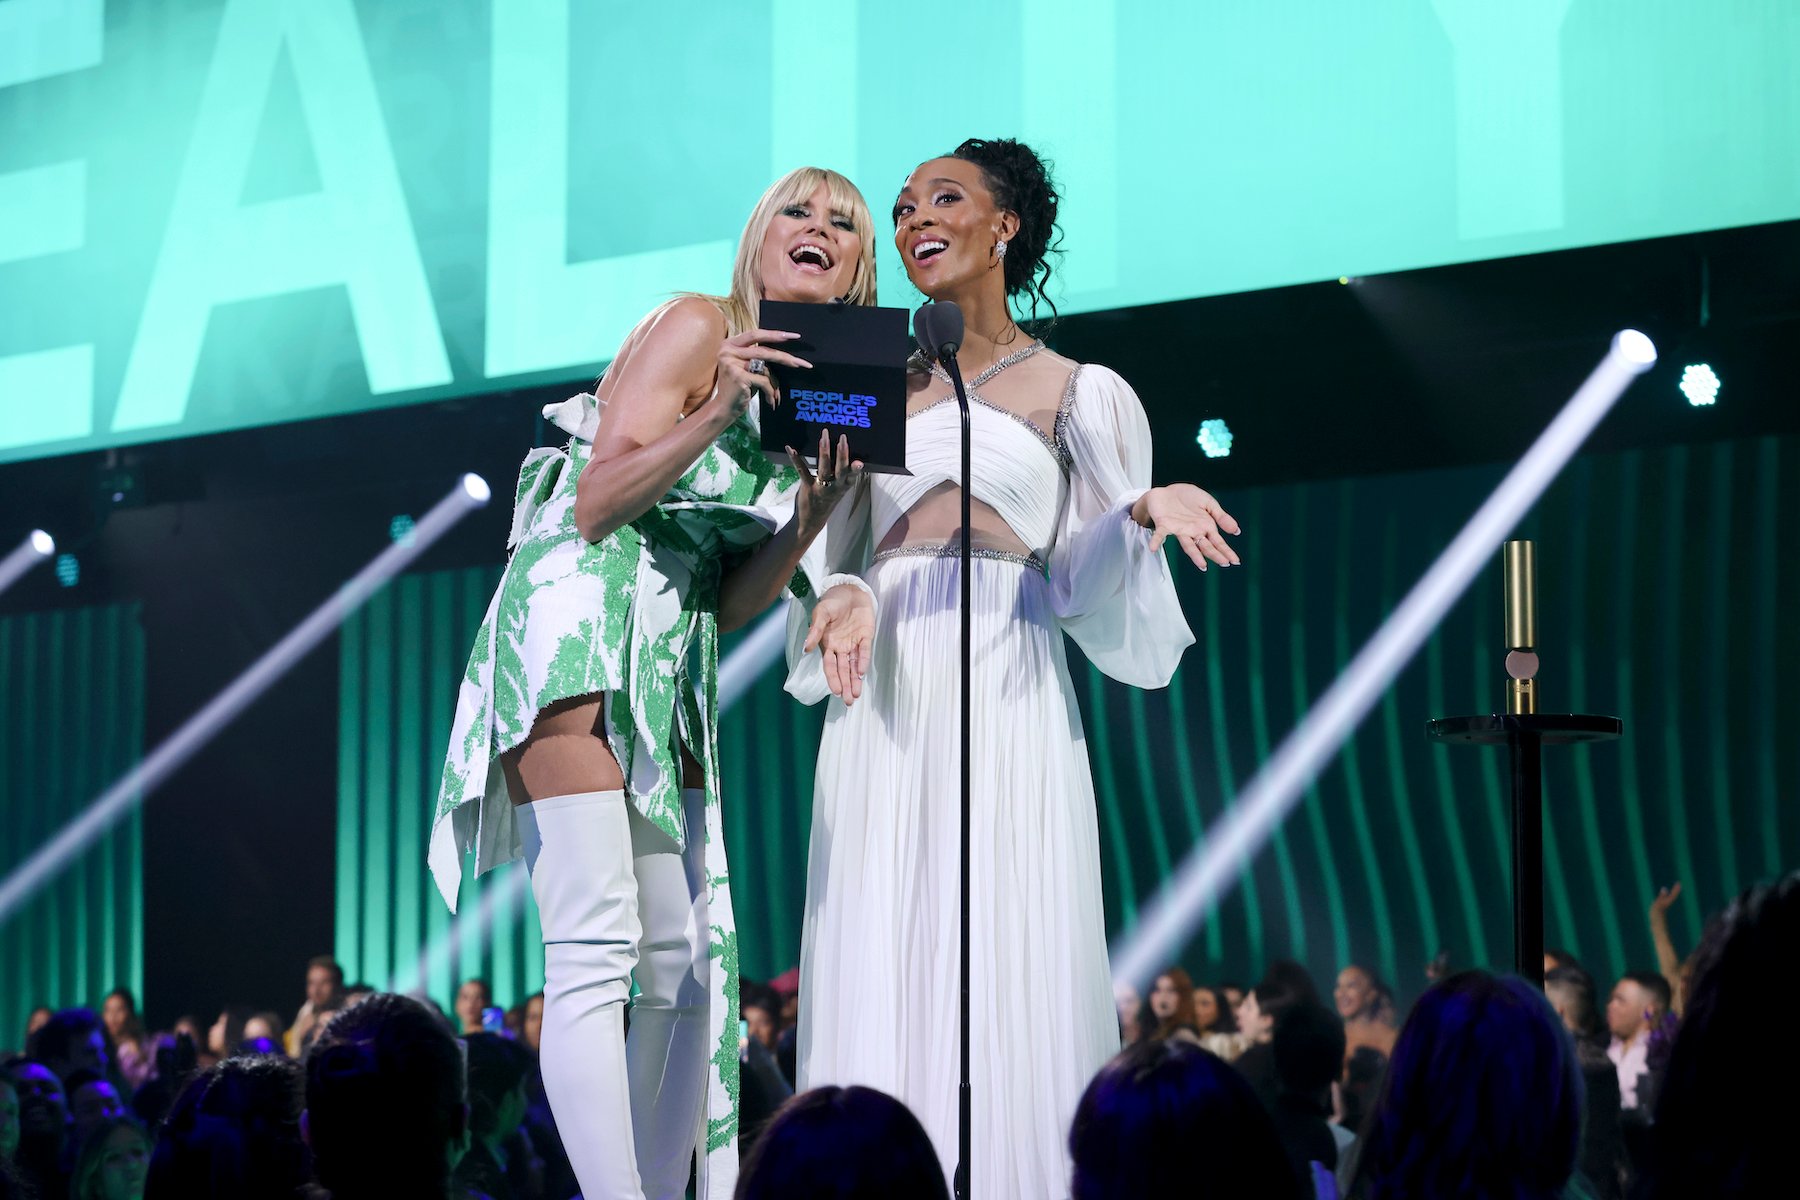 People's Choice Awards 2022 The Complete List of Winners